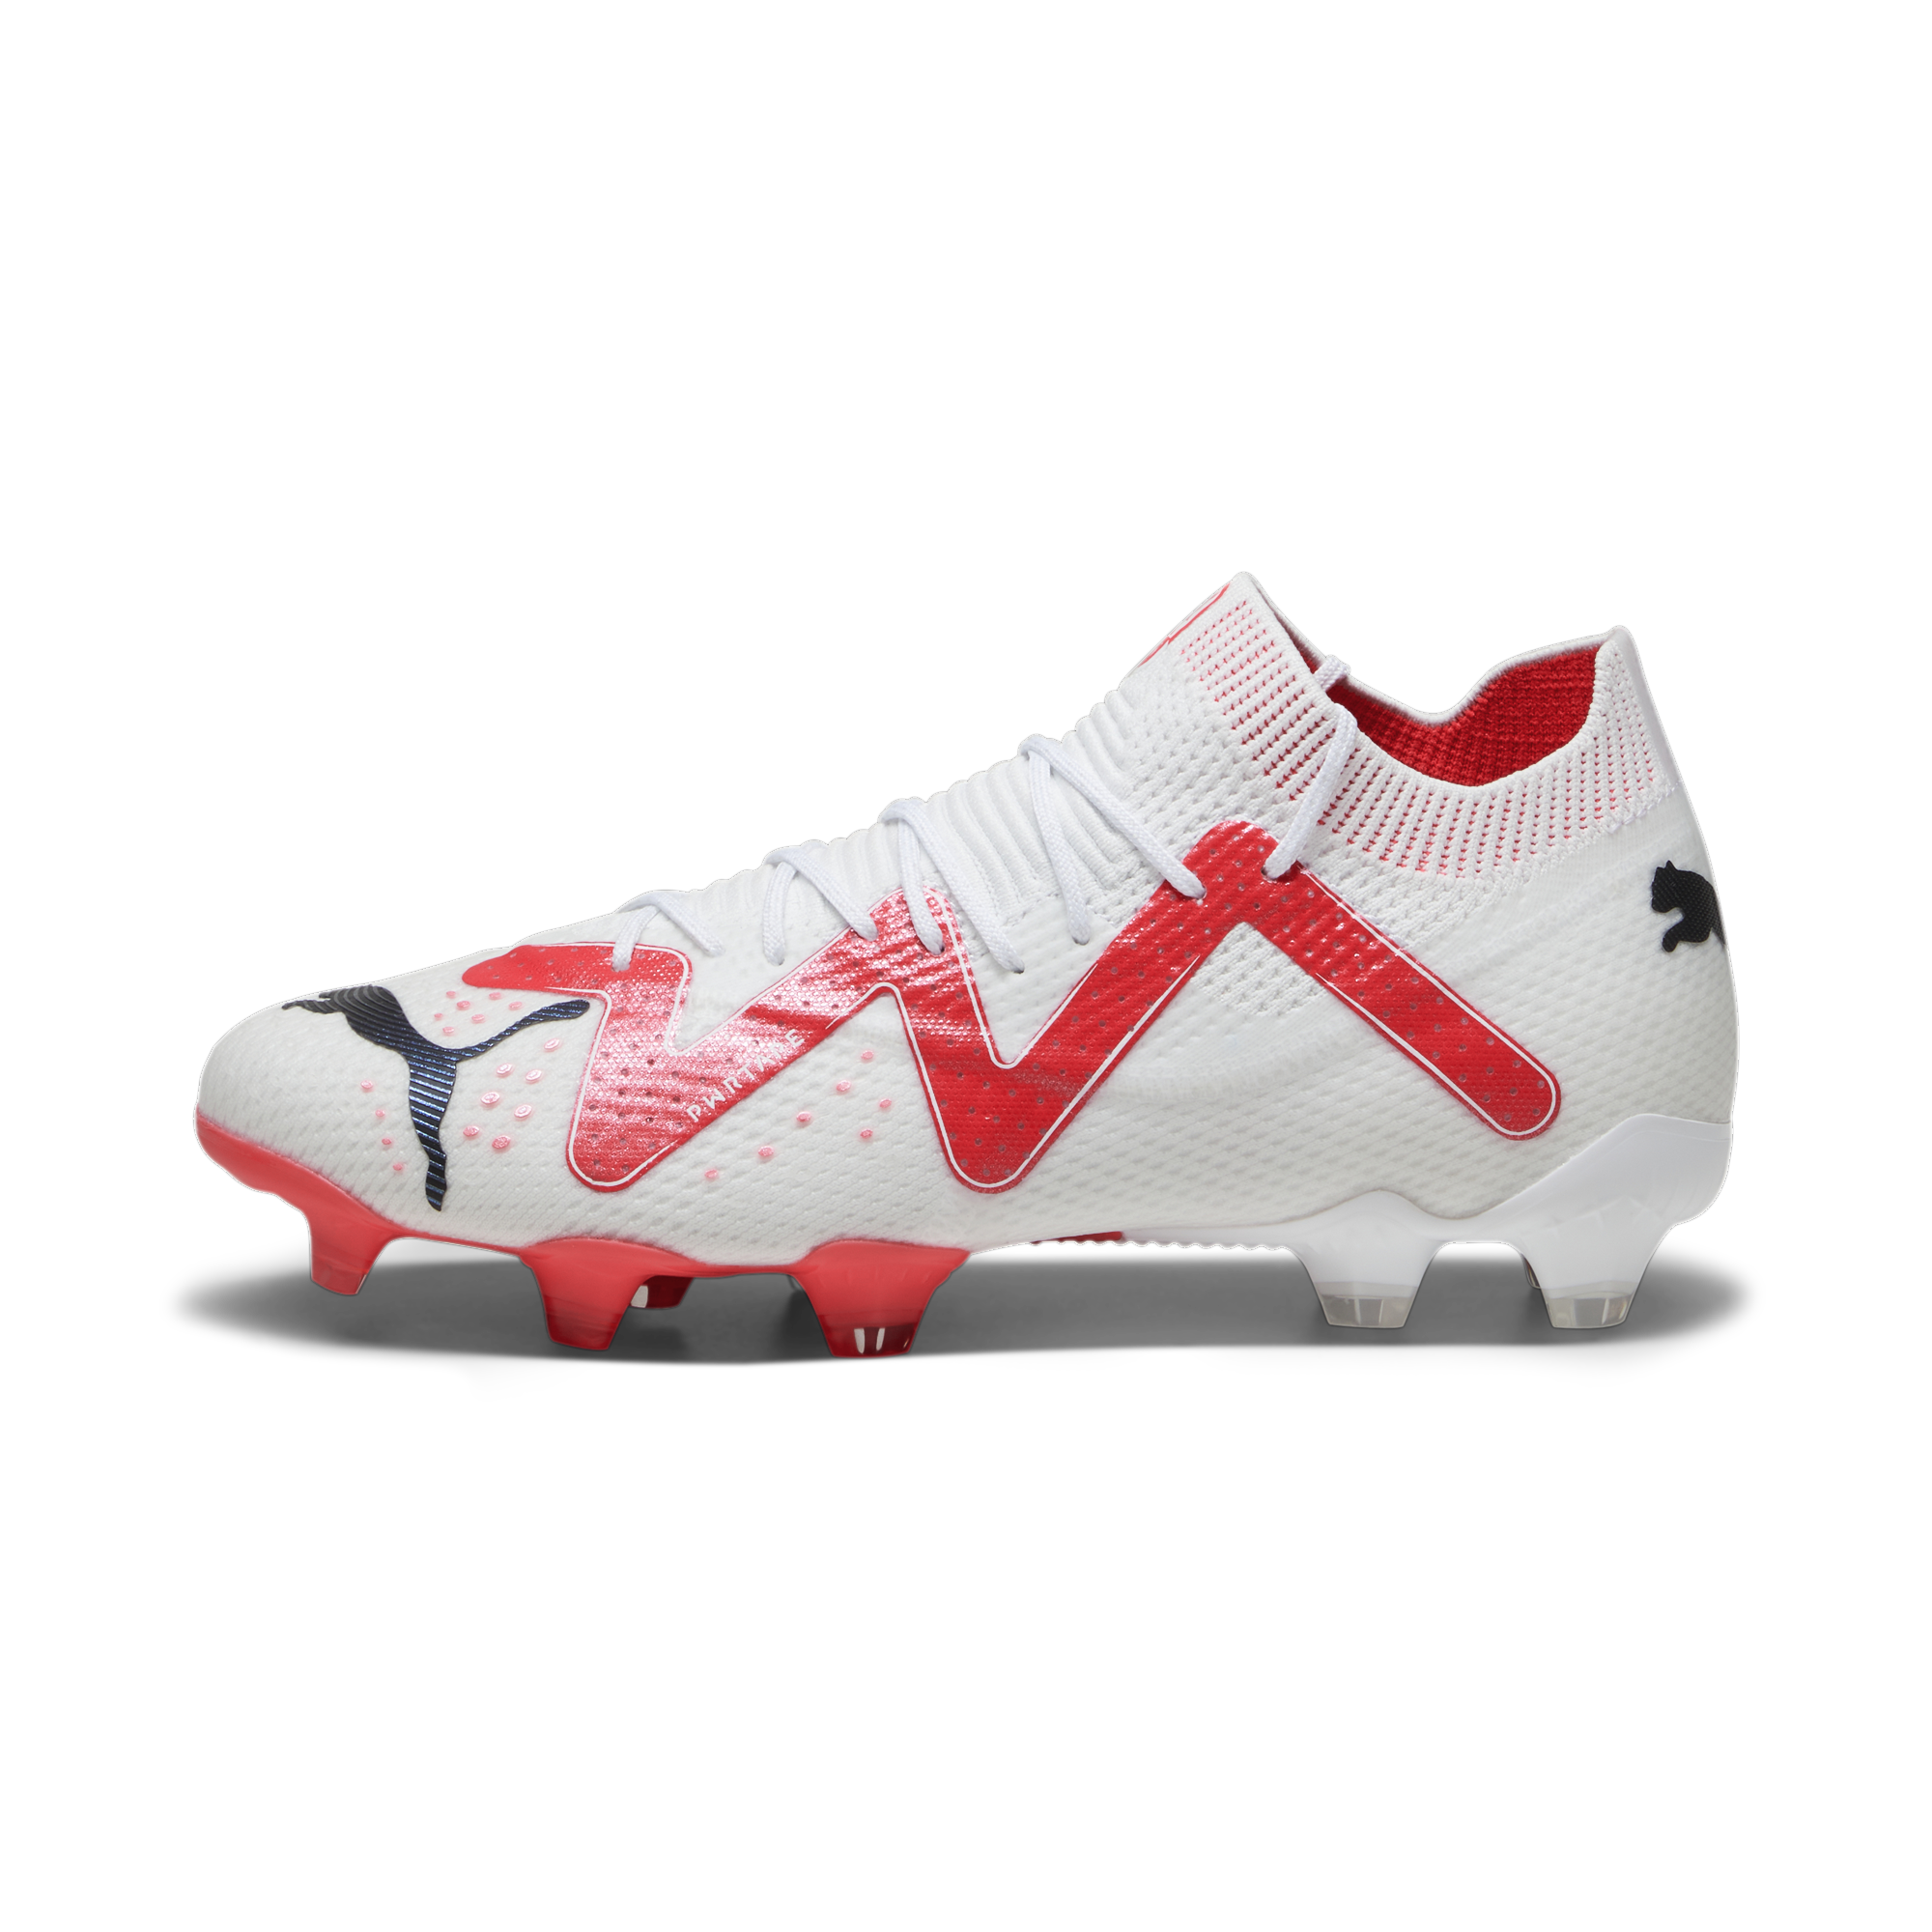 Puma Women's Future Ultimate Firm Ground Cleats